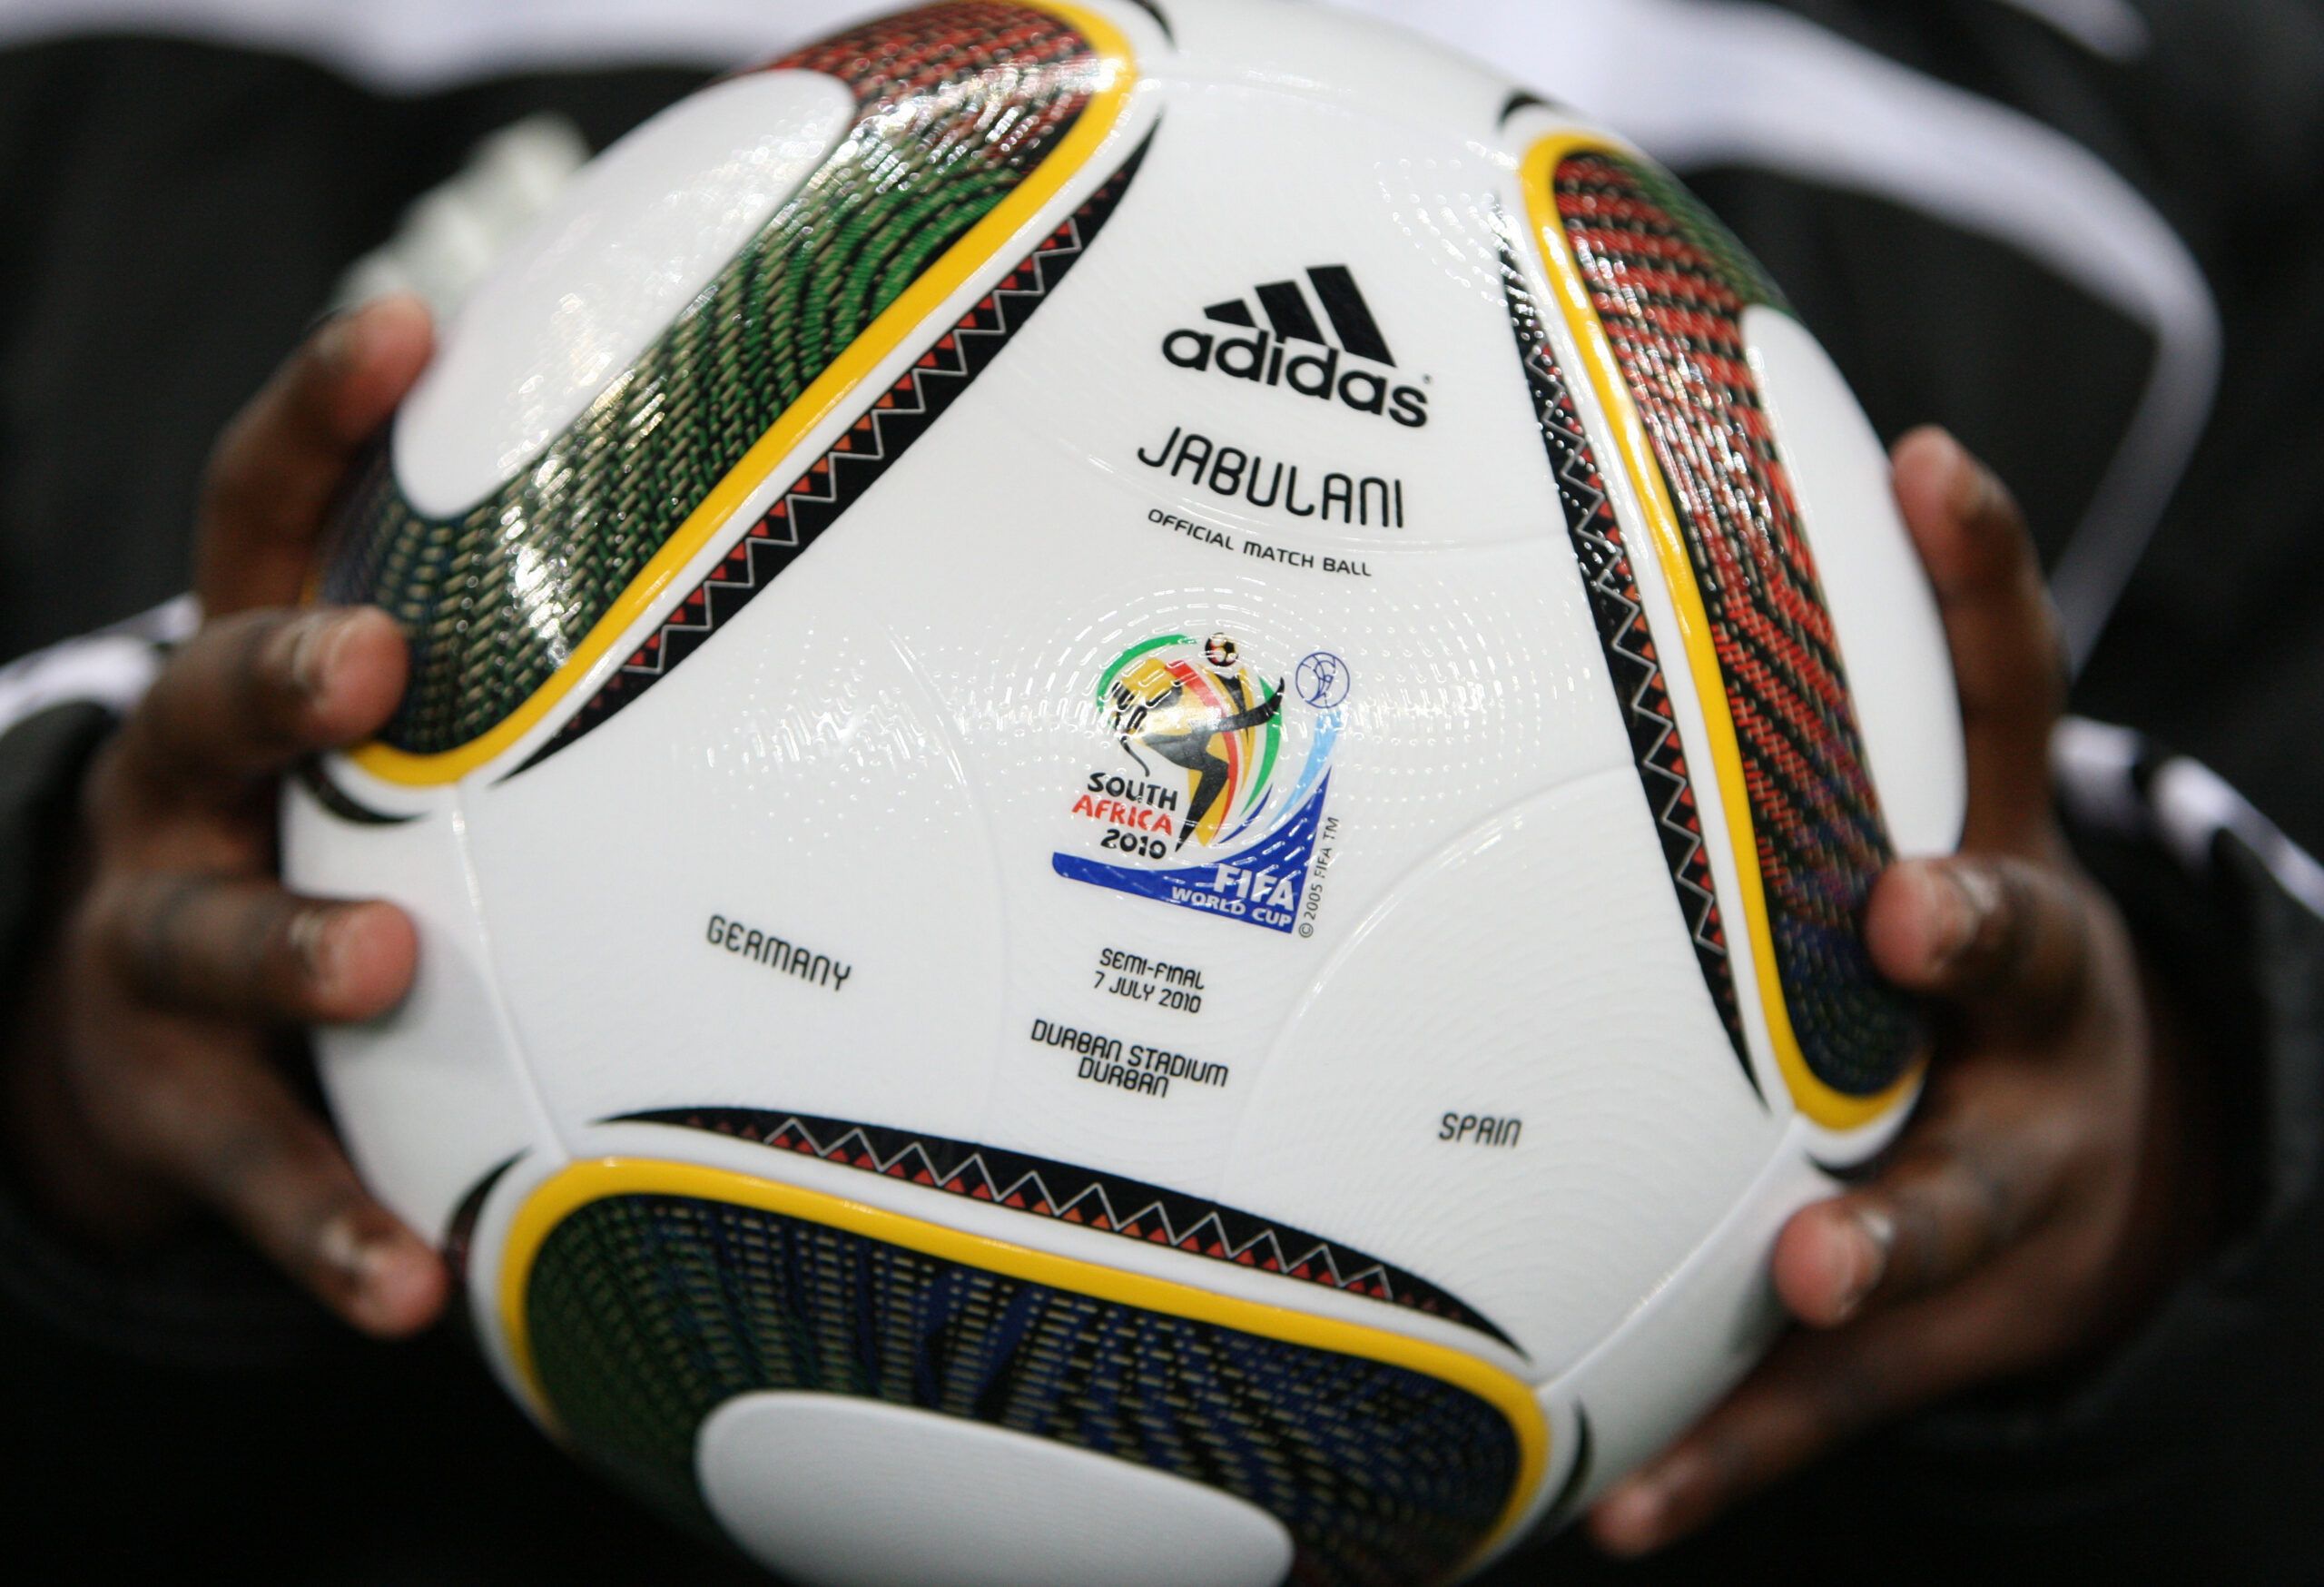 picar bosquejo Río Paraná World Cup: Footage of the Jabulani ball causing mayhem in 2010